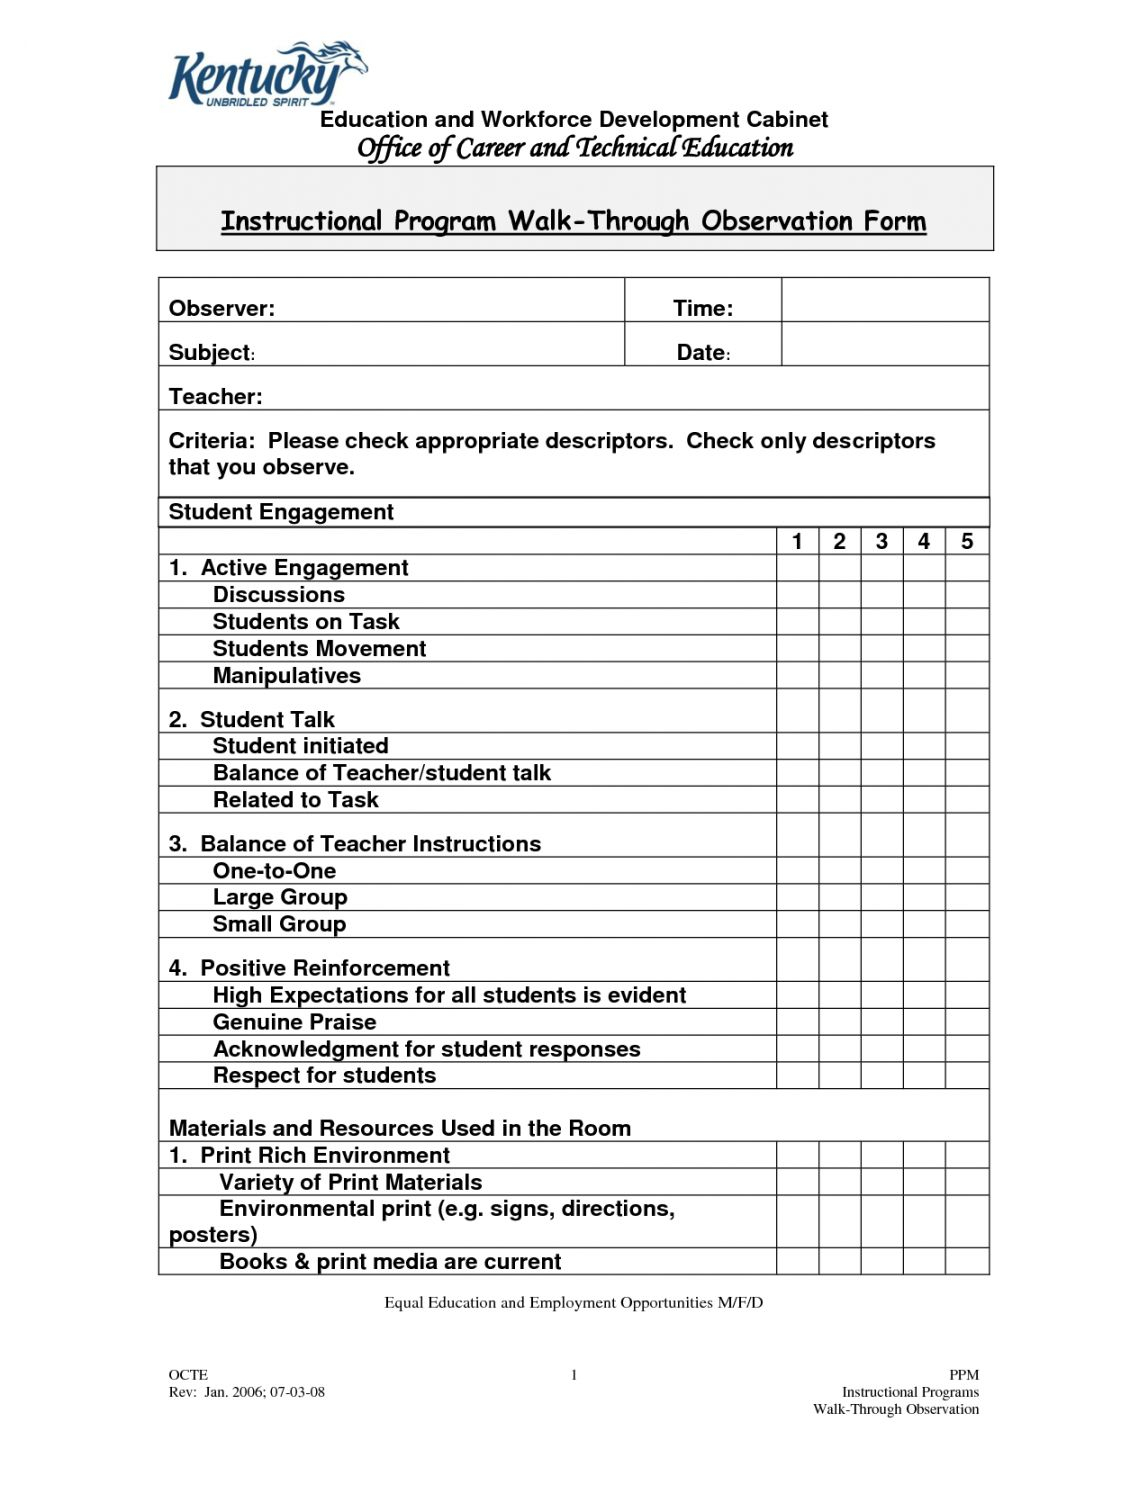 Get Our Example Of Formative Assessment Checklist Template – Cute11 Regarding Formative Assessment Checklist Template For Formative Assessment Checklist Template